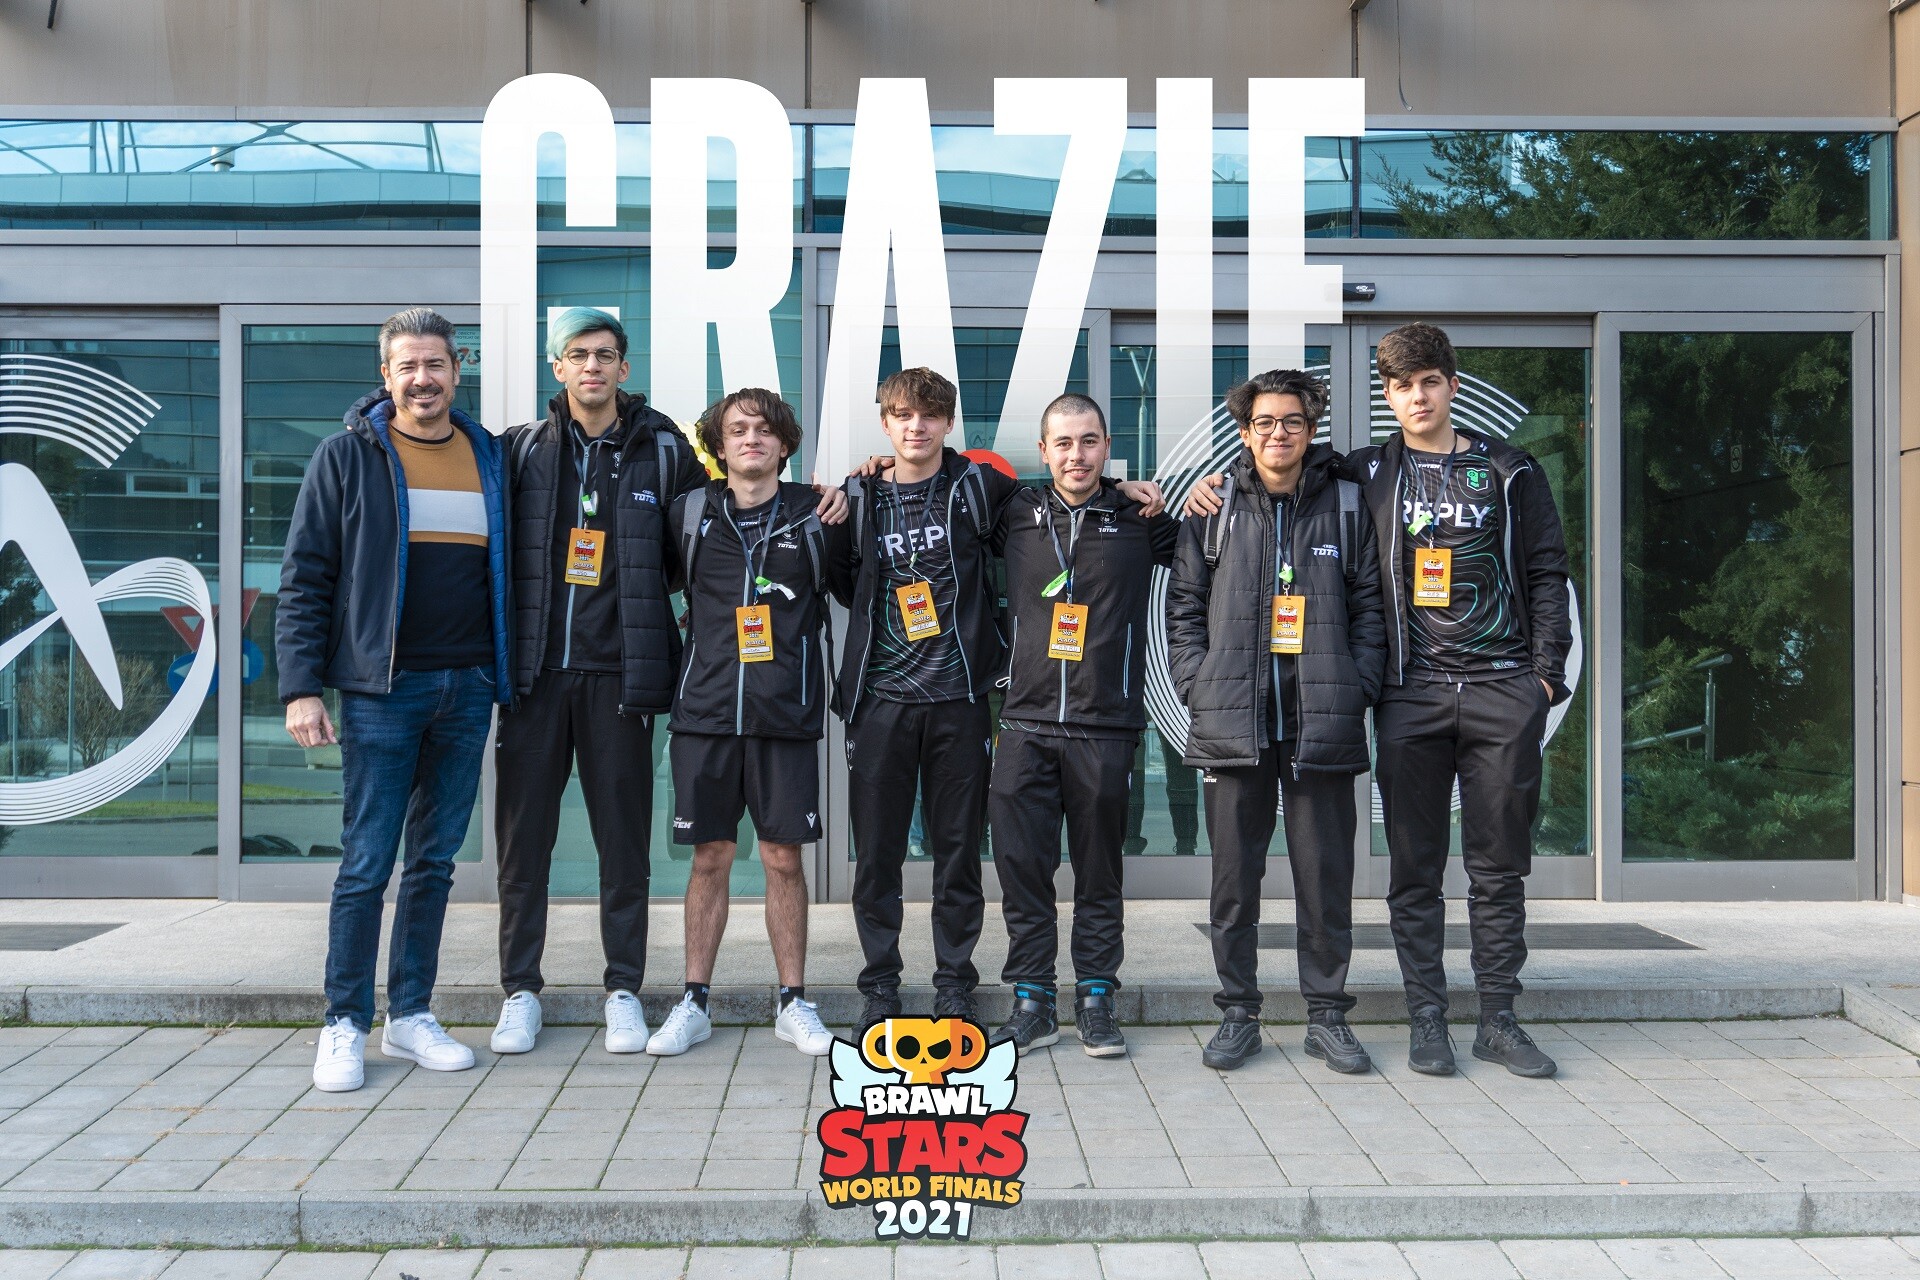 Totem’s response is among the top four in the world of Brawl Stars